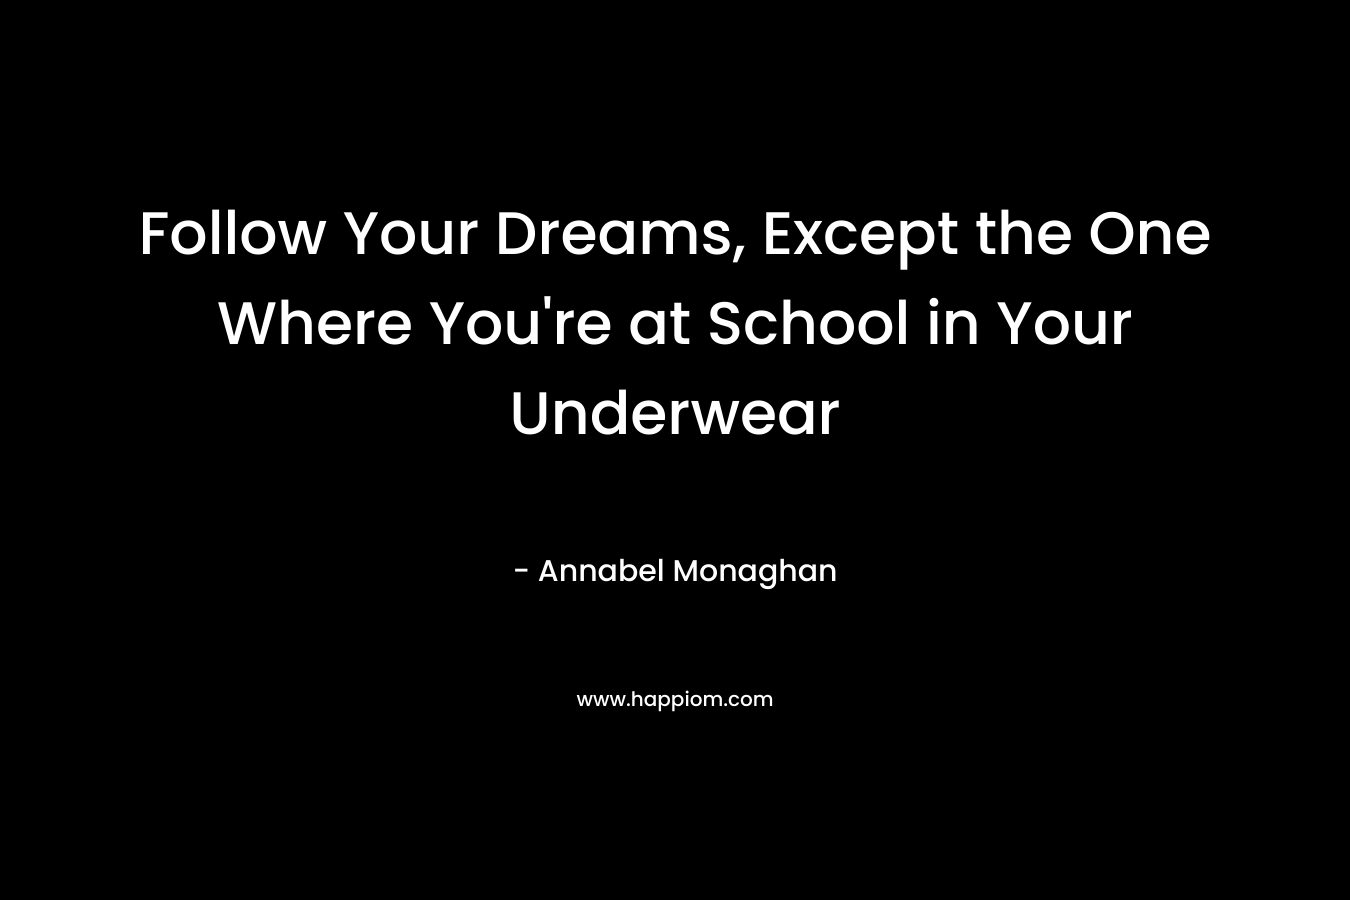 Follow Your Dreams, Except the One Where You’re at School in Your Underwear – Annabel Monaghan